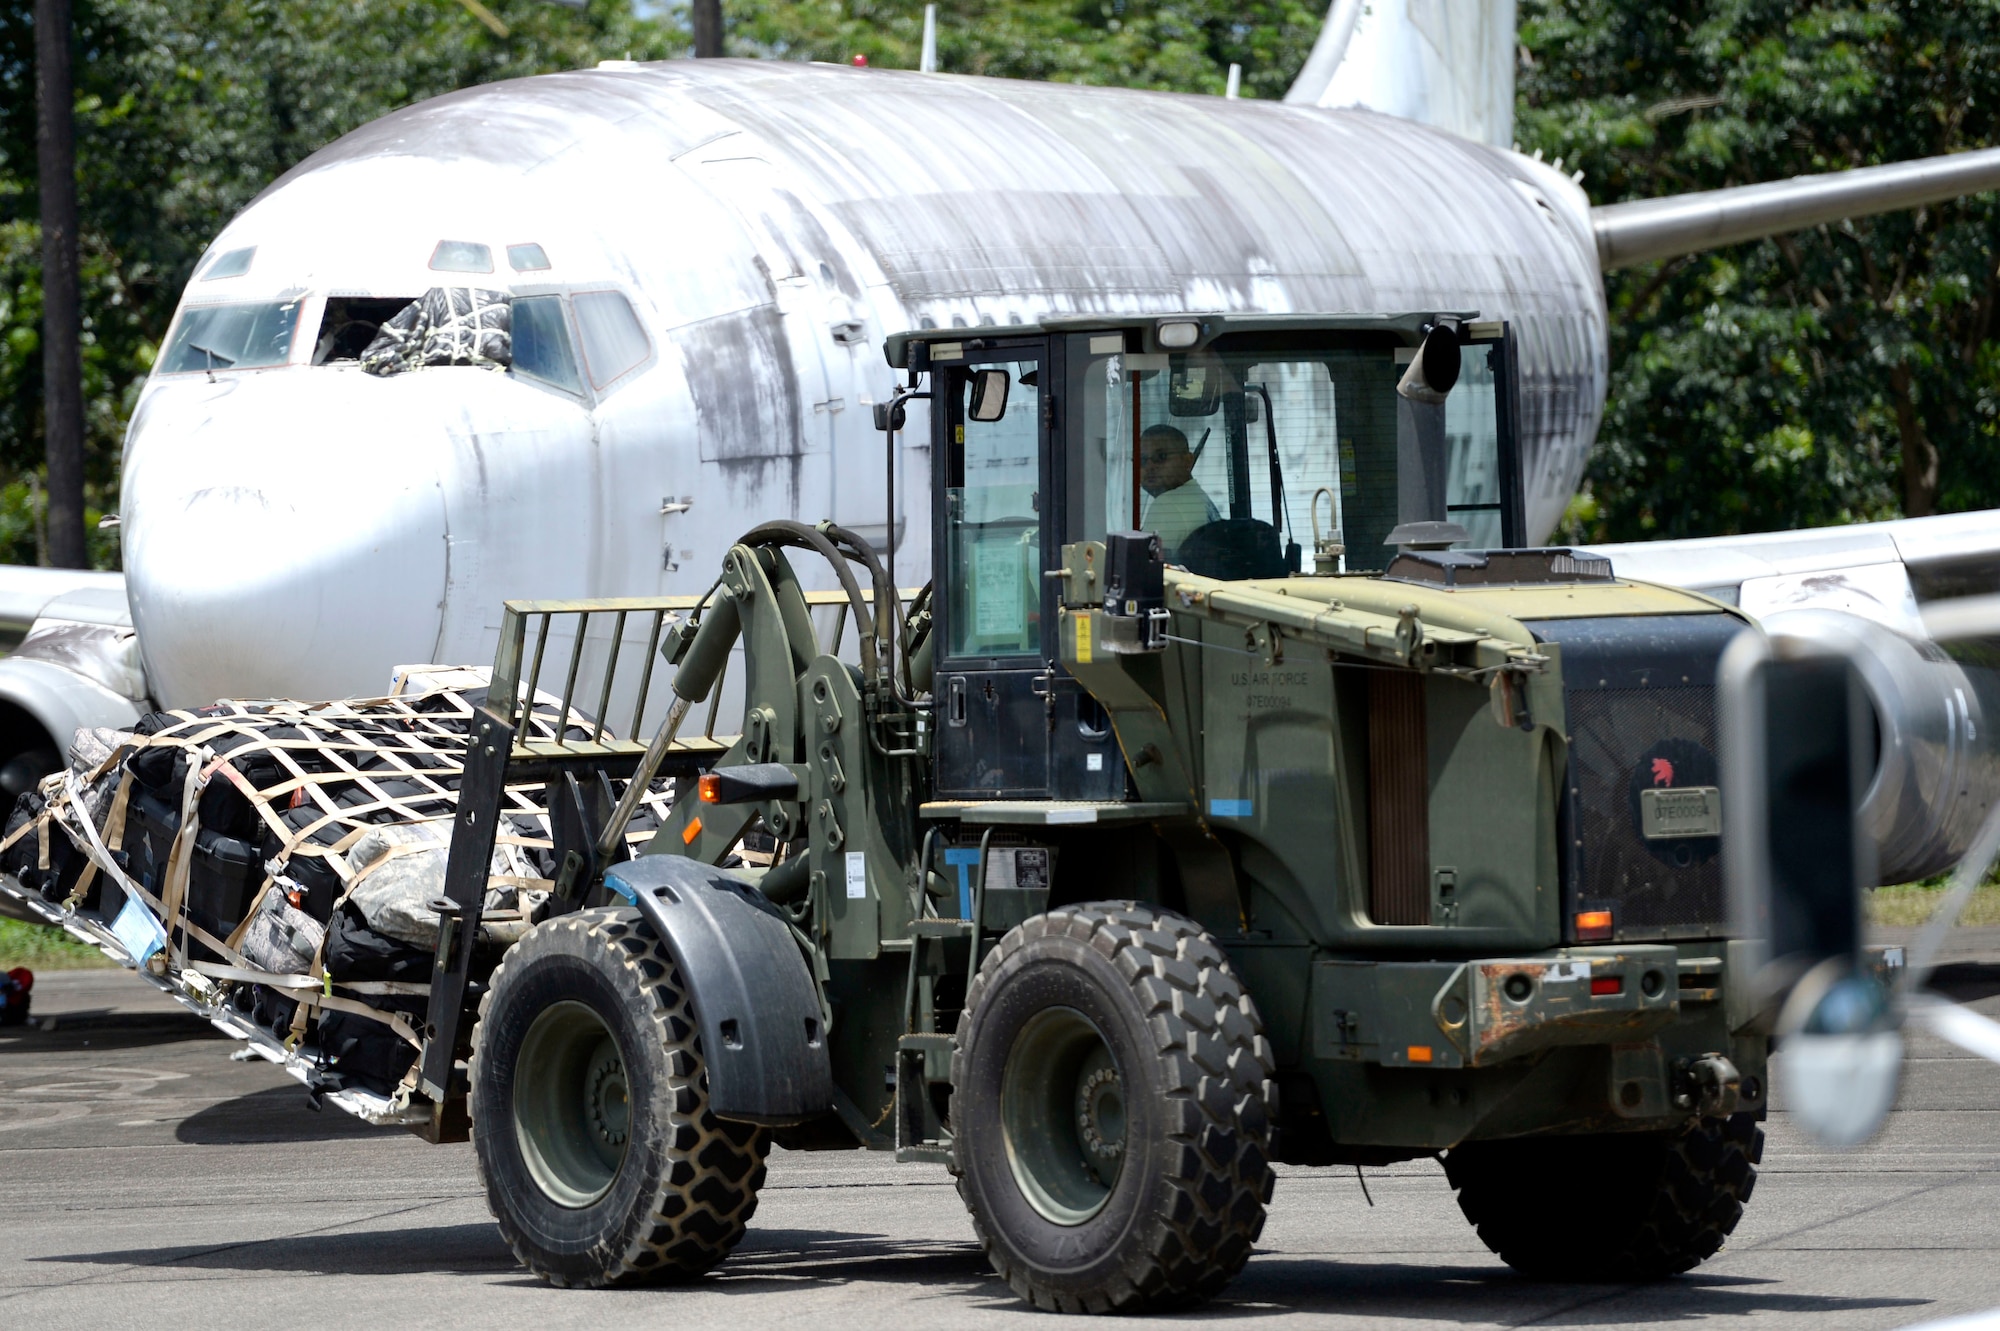 U.S. Air Force Staff Sgt. Raul Perez, 823rd Expeditionary RED HORSE Squadron vehicle maintenance NCOIC, out of Hurlburt Field, Fla., moves a pallet with a forklift at Base Aerea Coronel Hector Caraccioli Moncada in La Ceiba, Honduras, Aug. 28, 2015, to a waiting C-17 Globemaster III from the 62nd Airlift Wing out of Joint Base Lewis-McChord, Wash. Vehicles, equipment and personnel from the New Horizons Honduras 2015 training exercise redeployed to Hurlburt Field. All remaining equipment will be transported via sealift. New Horizons was launched in the 1980s and is an annual joint humanitarian assistance exercise that U.S. Southern Command conducts with a partner nation in Central America, South America or the Caribbean. The exercise improves joint training readiness of U.S. and partner nation civil engineers, medical professionals and support personnel through humanitarian assistance activities. (U.S. Air Force photo by Capt. David J. Murphy/Released)